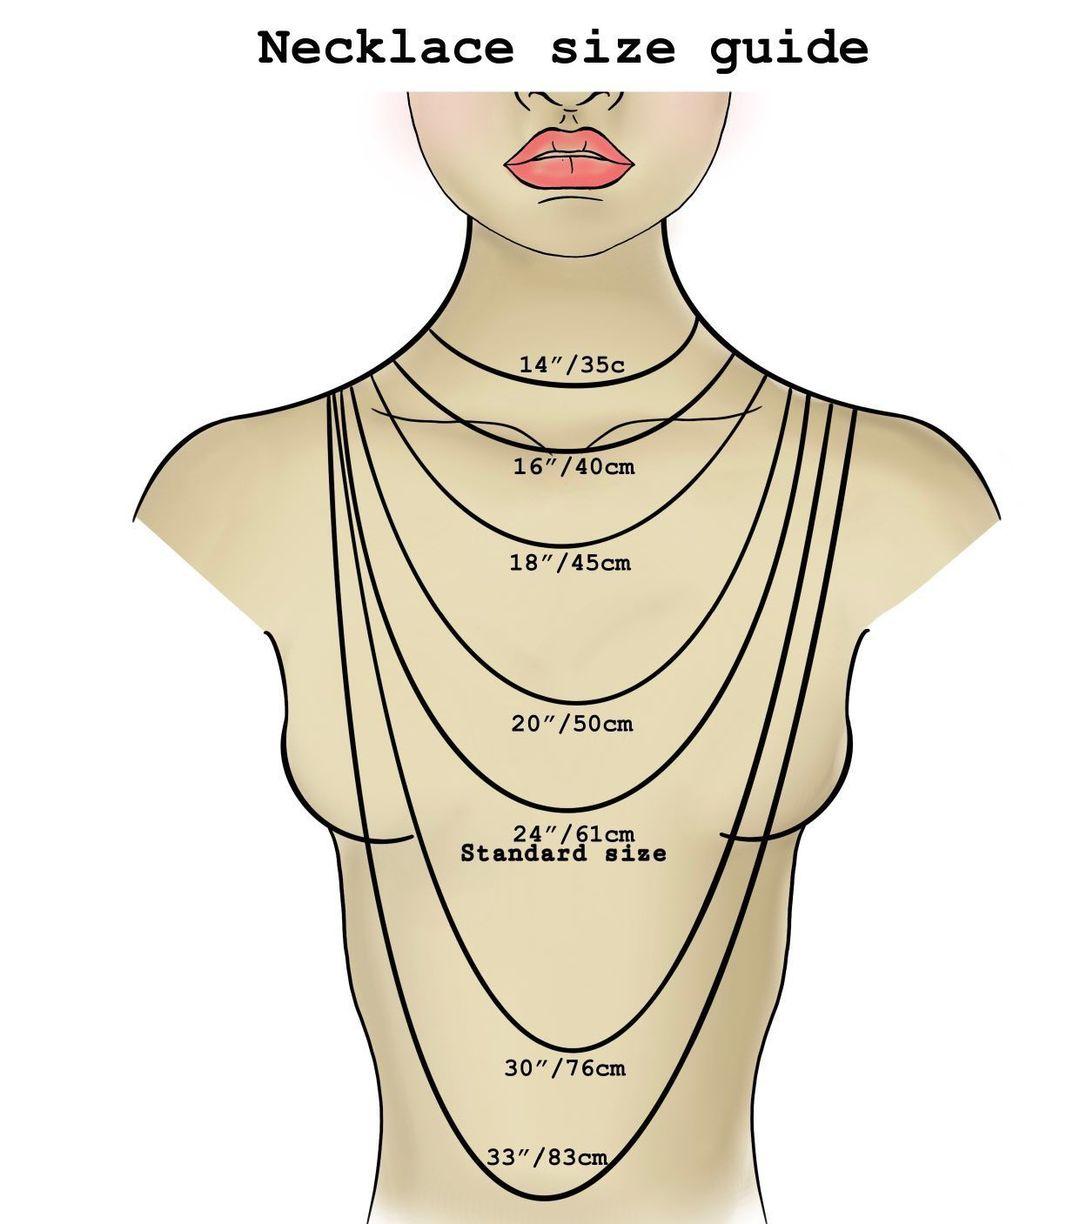 Silver nursing pearl necklace size chart by blossy.